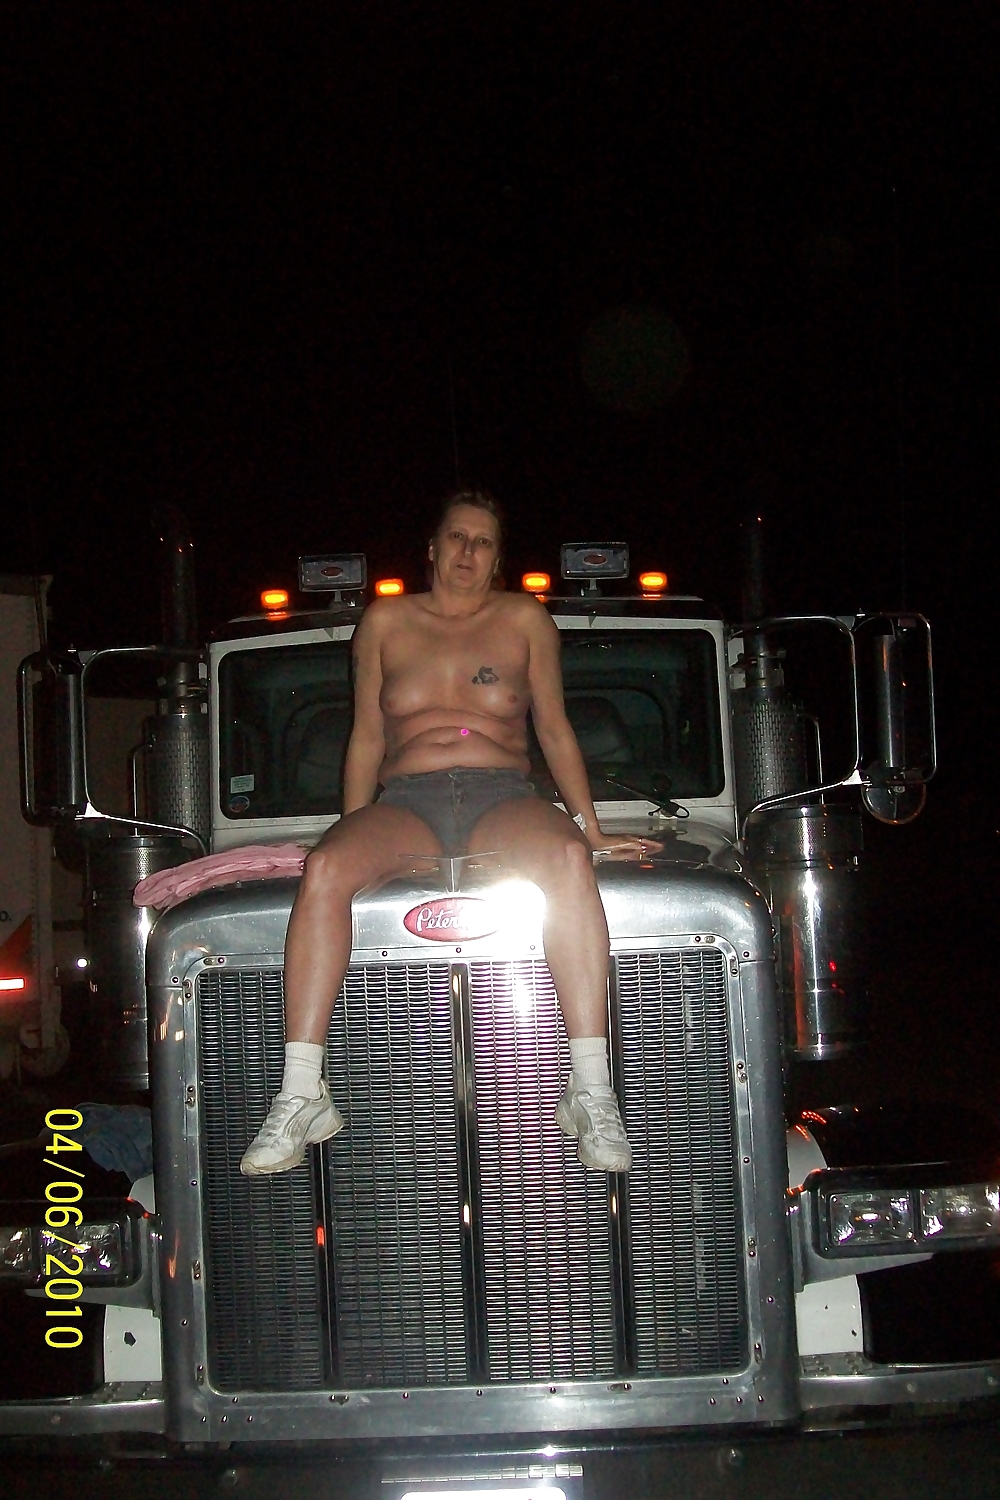 Hot Summer Night On The Road adult photos